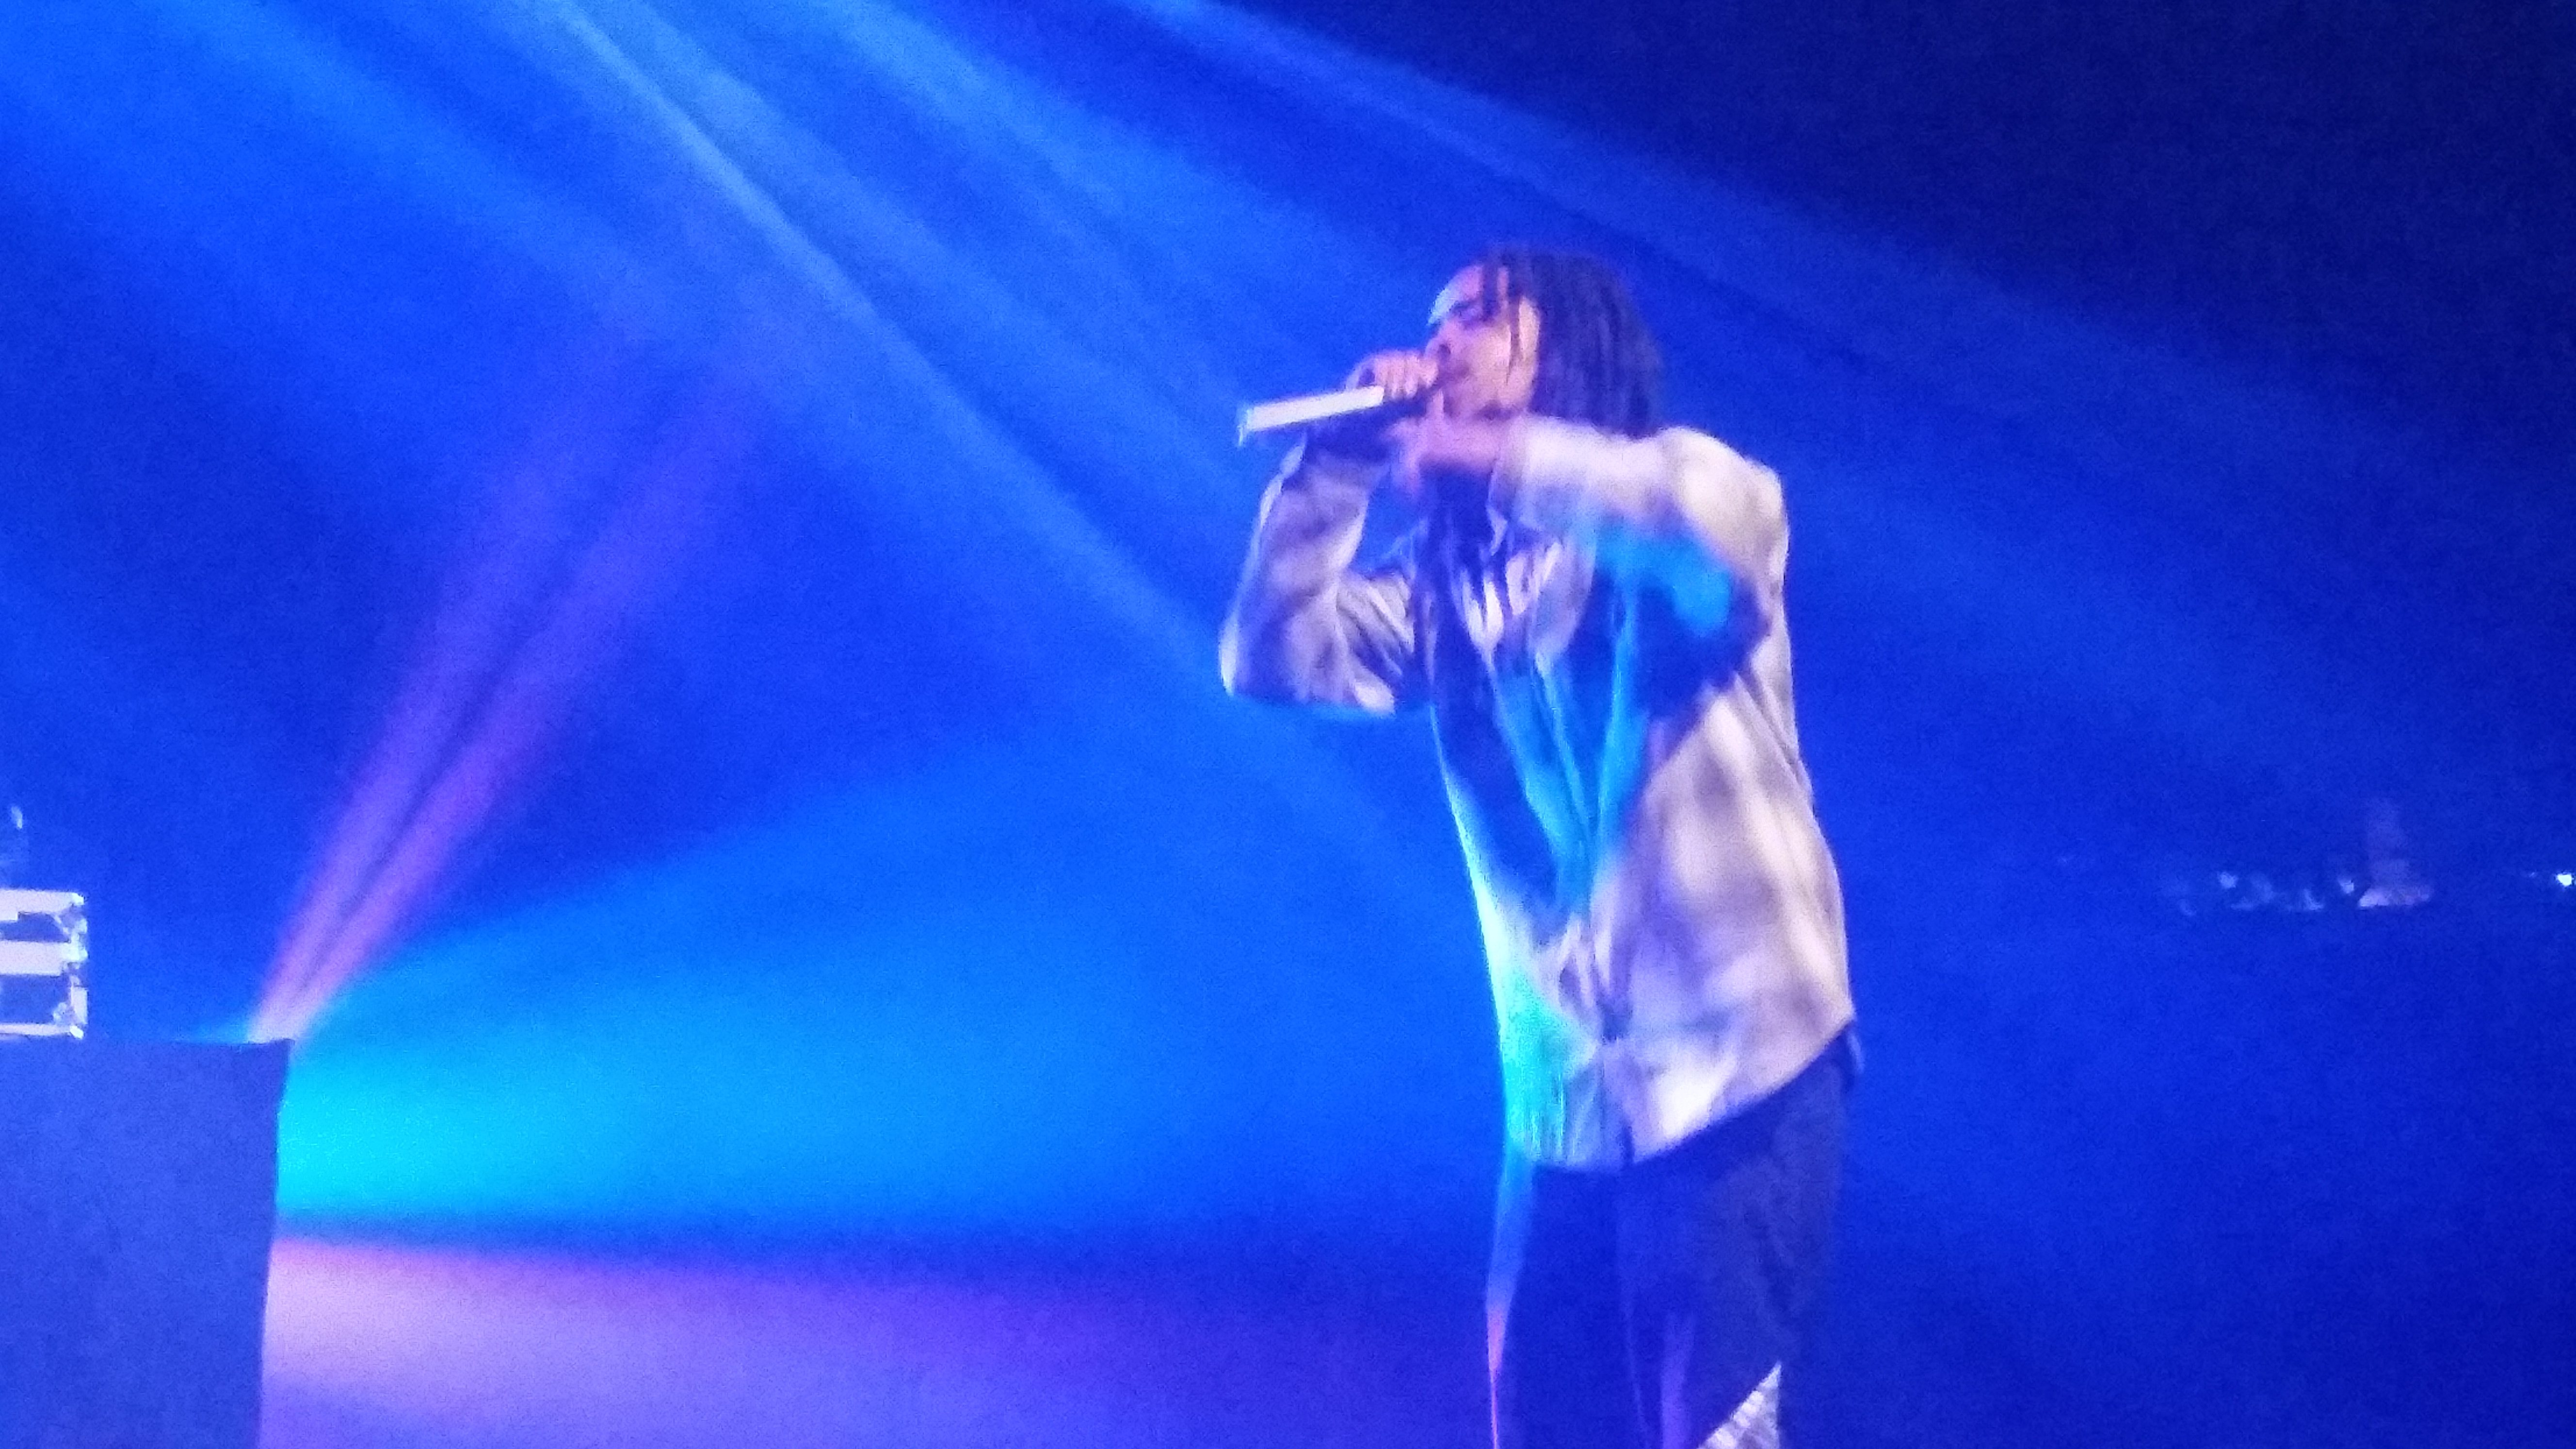 Live review of Earl Sweatshirt and MIKE live show from Vancouver, BC